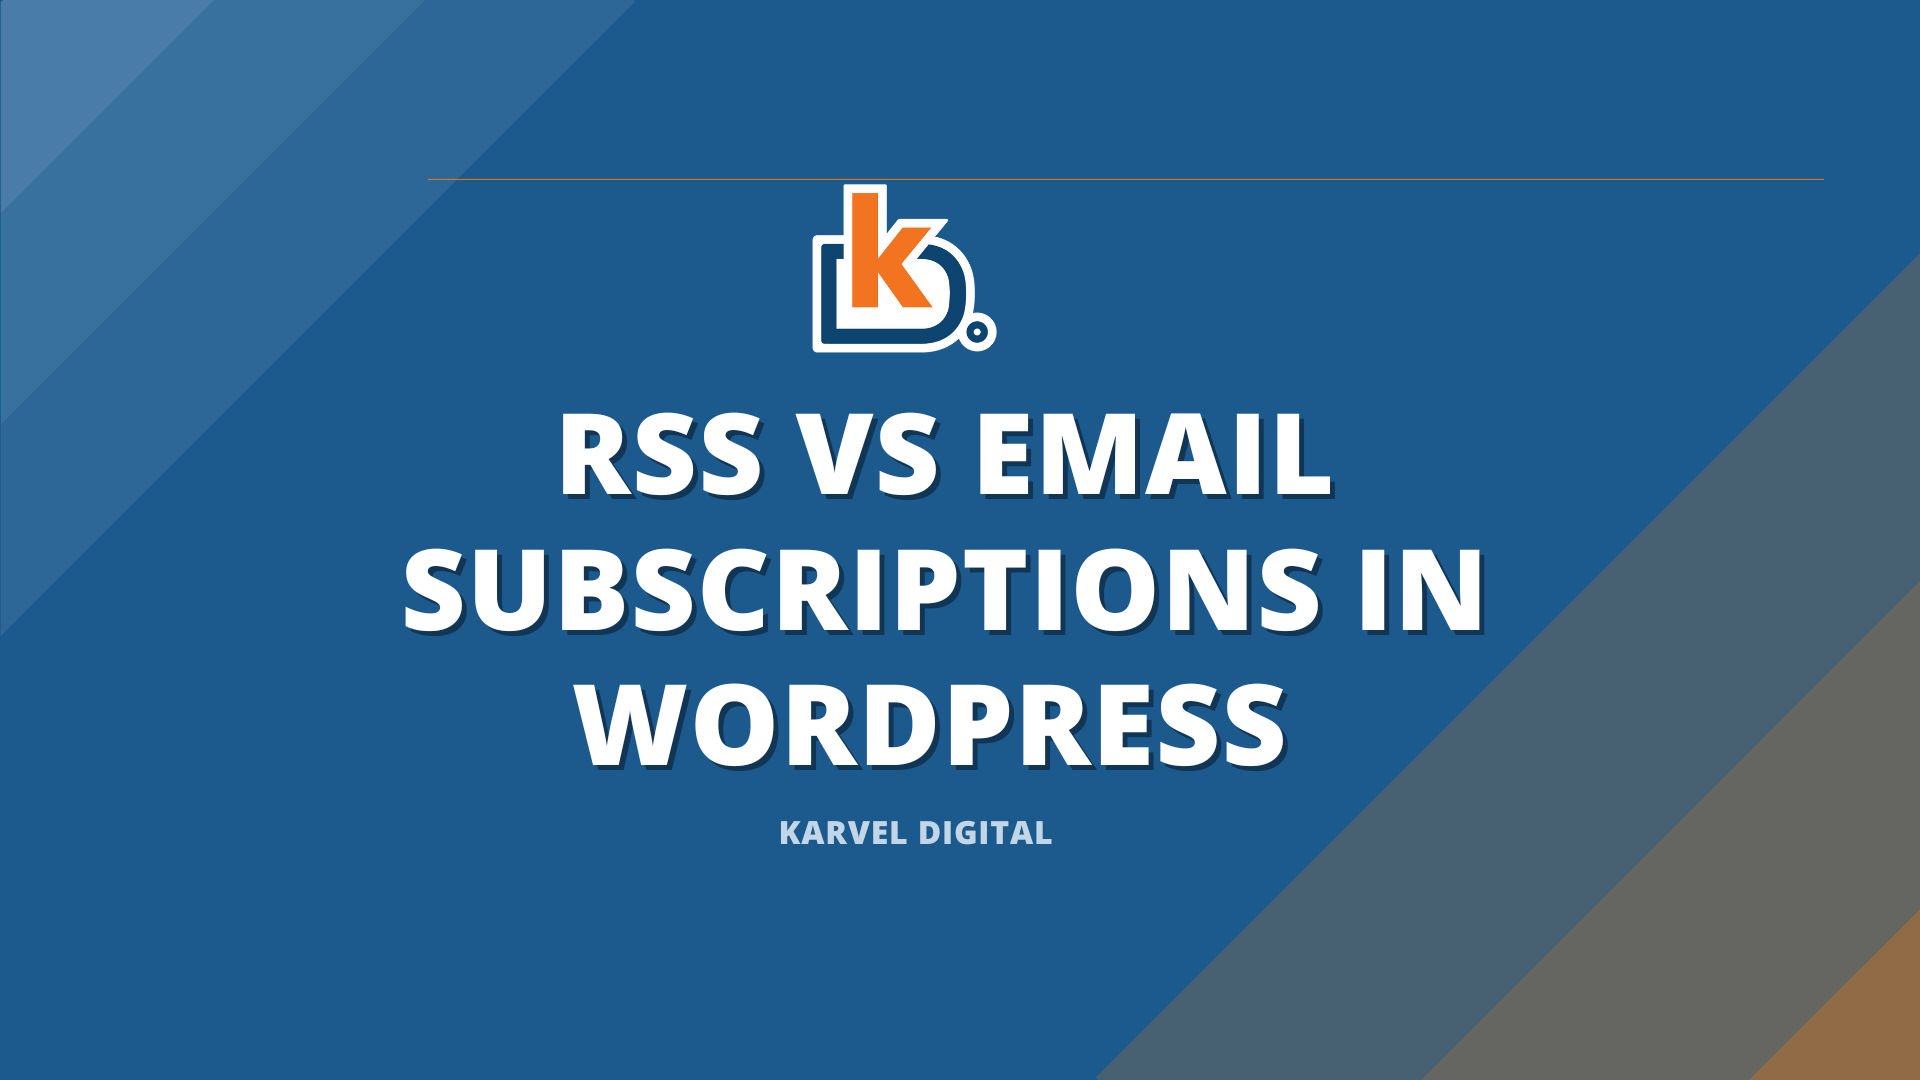 RSS vs Email Subscriptions